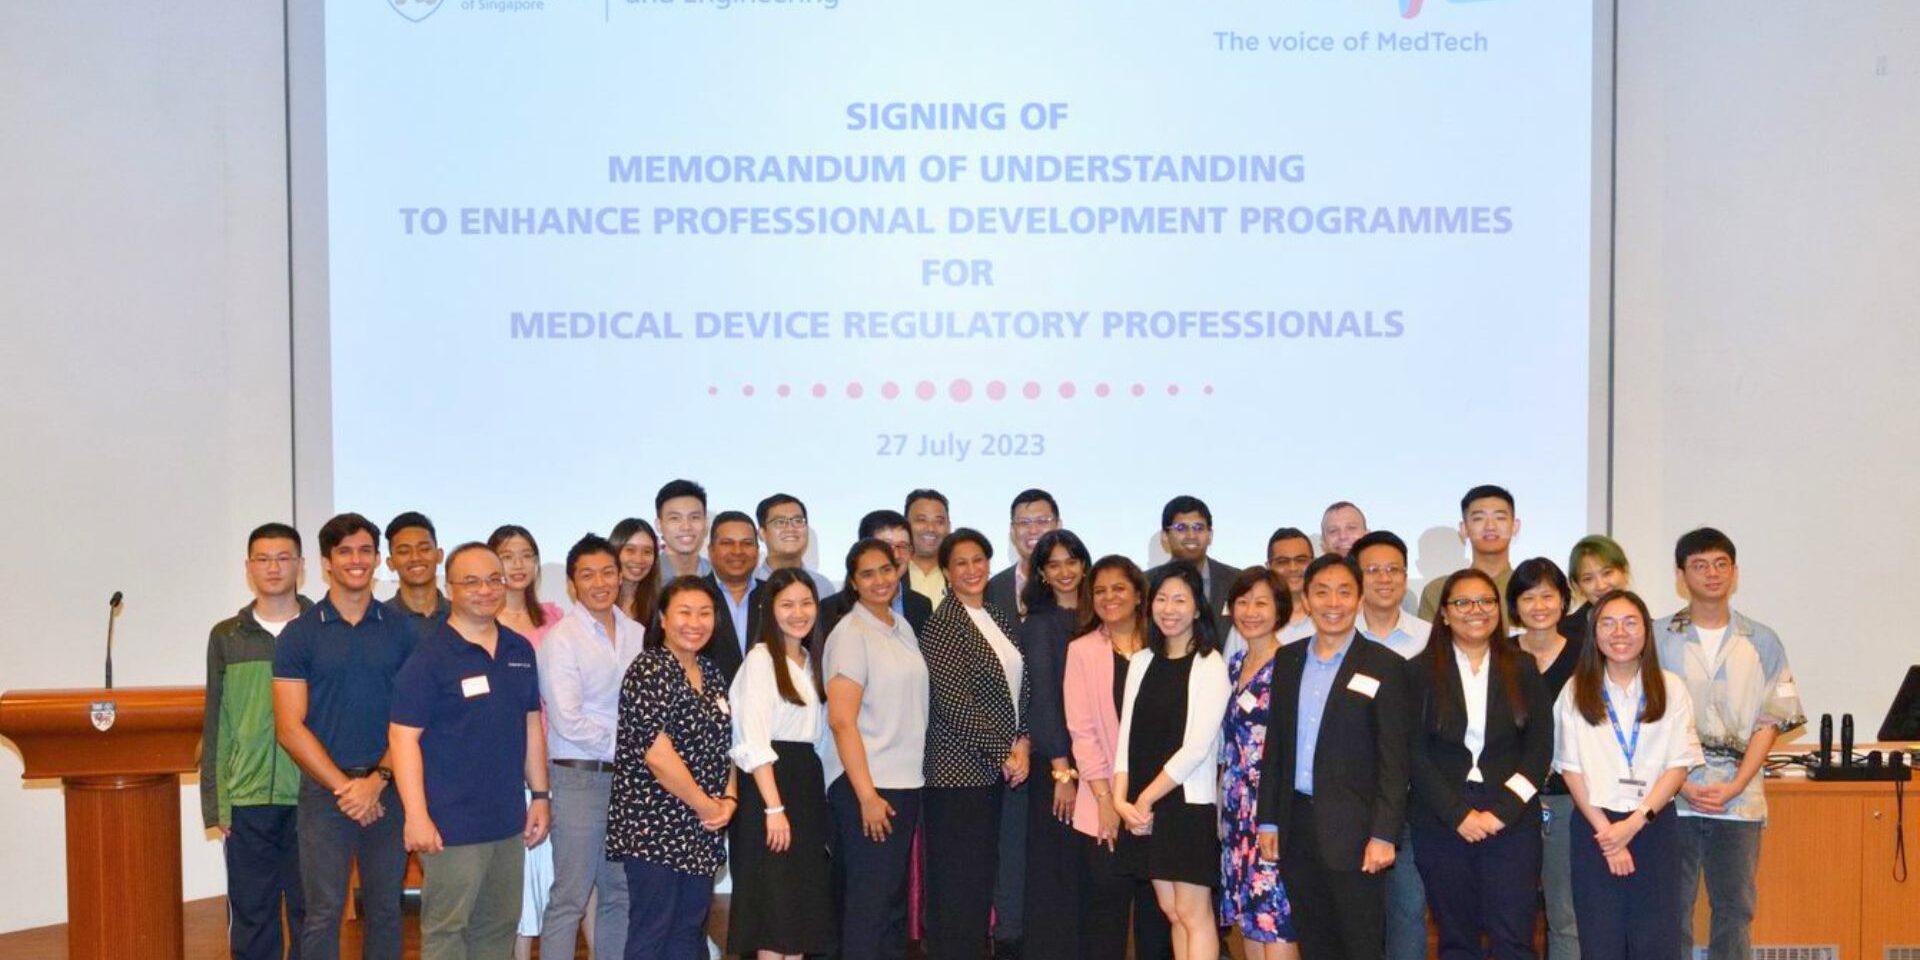 Faculty, APACMed members and NUS alums from the programme Graduate Certificate in Medical Devices Regulatory Affairs witnessed the signing and attended the industry seminar – the first official collaboration between NUS BME and APACMed  